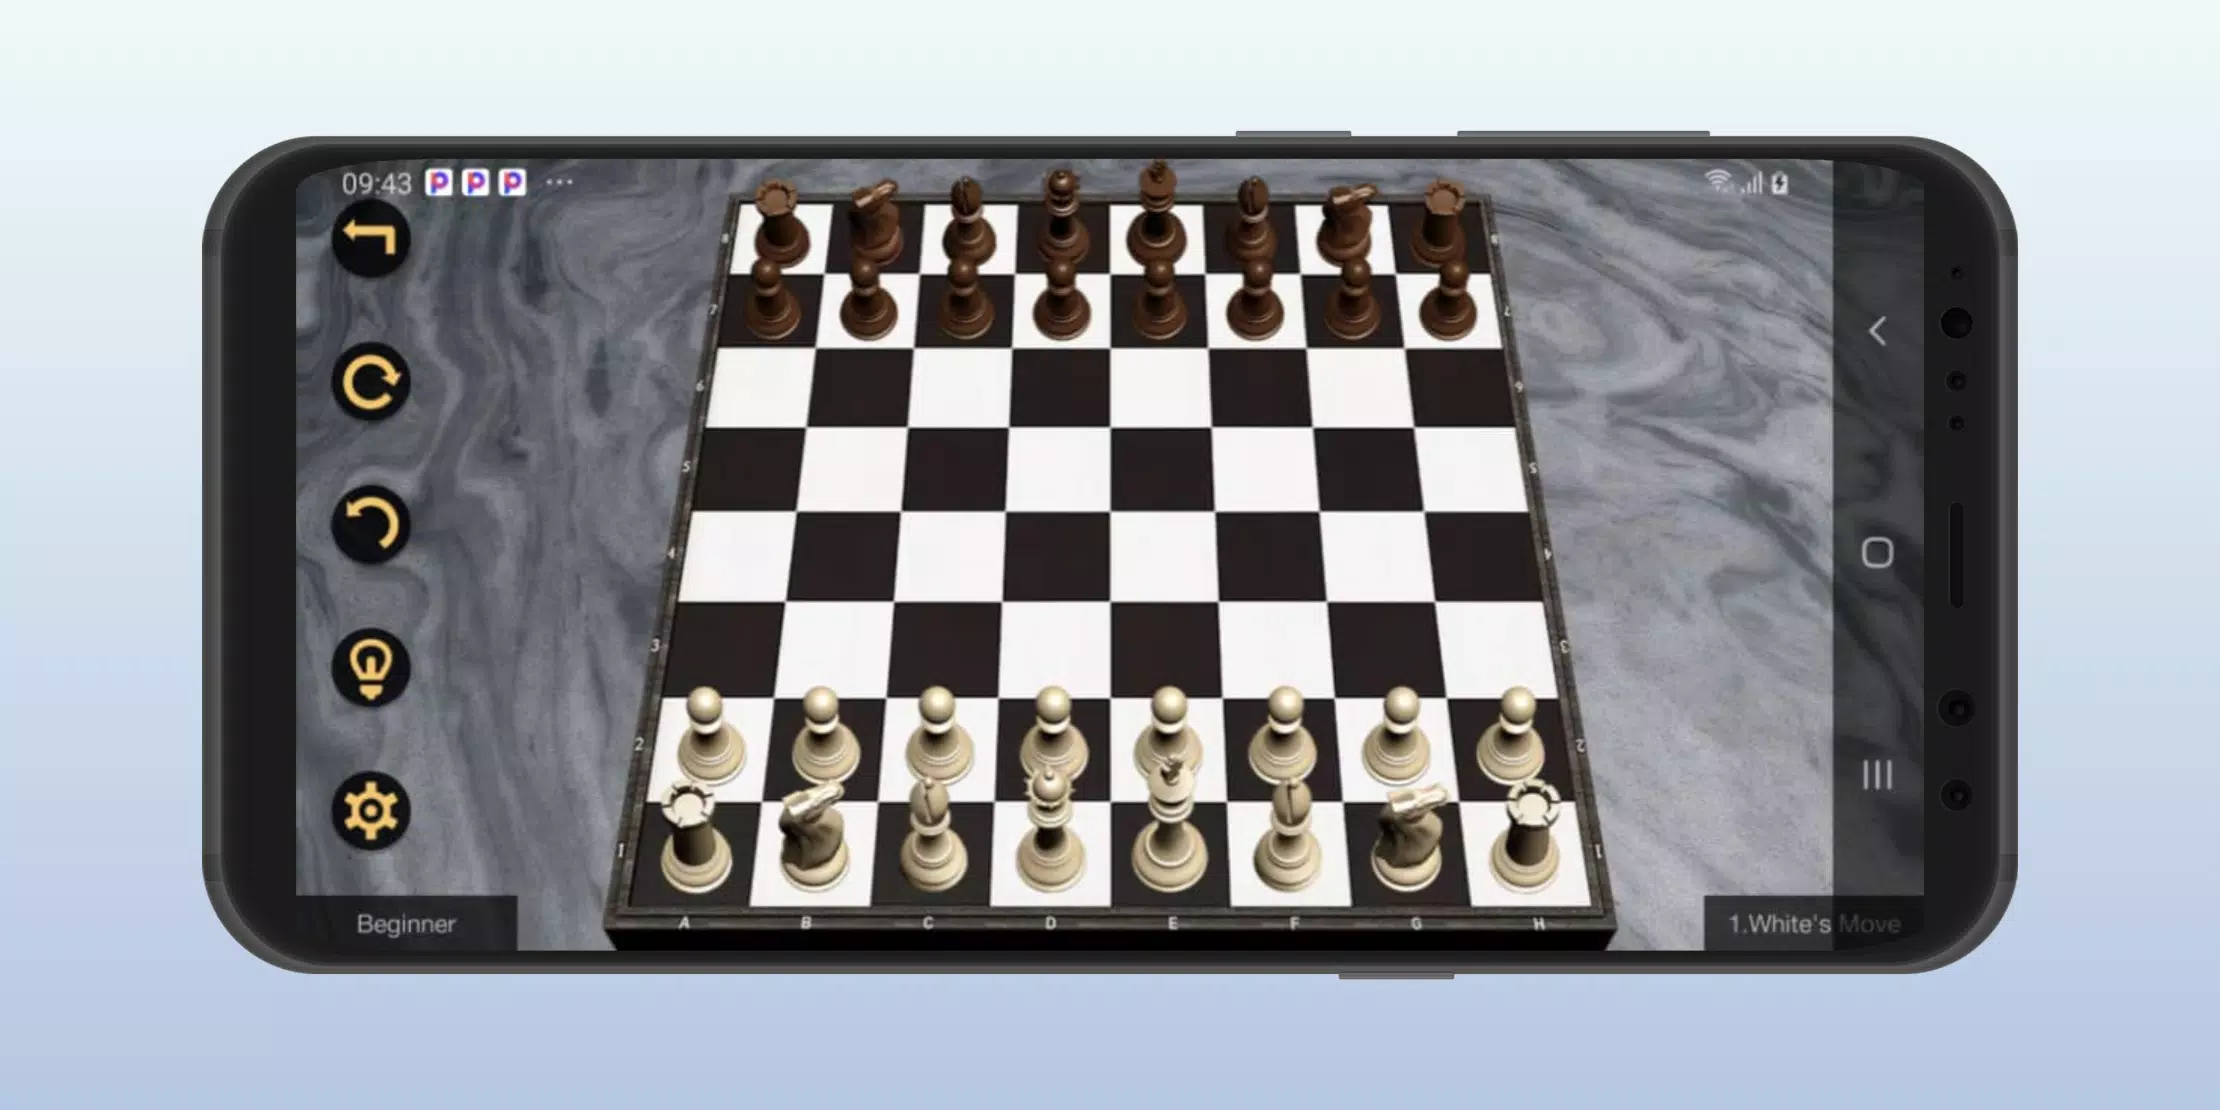 3D Chess Titans Offline APK (Android Game) - Free Download